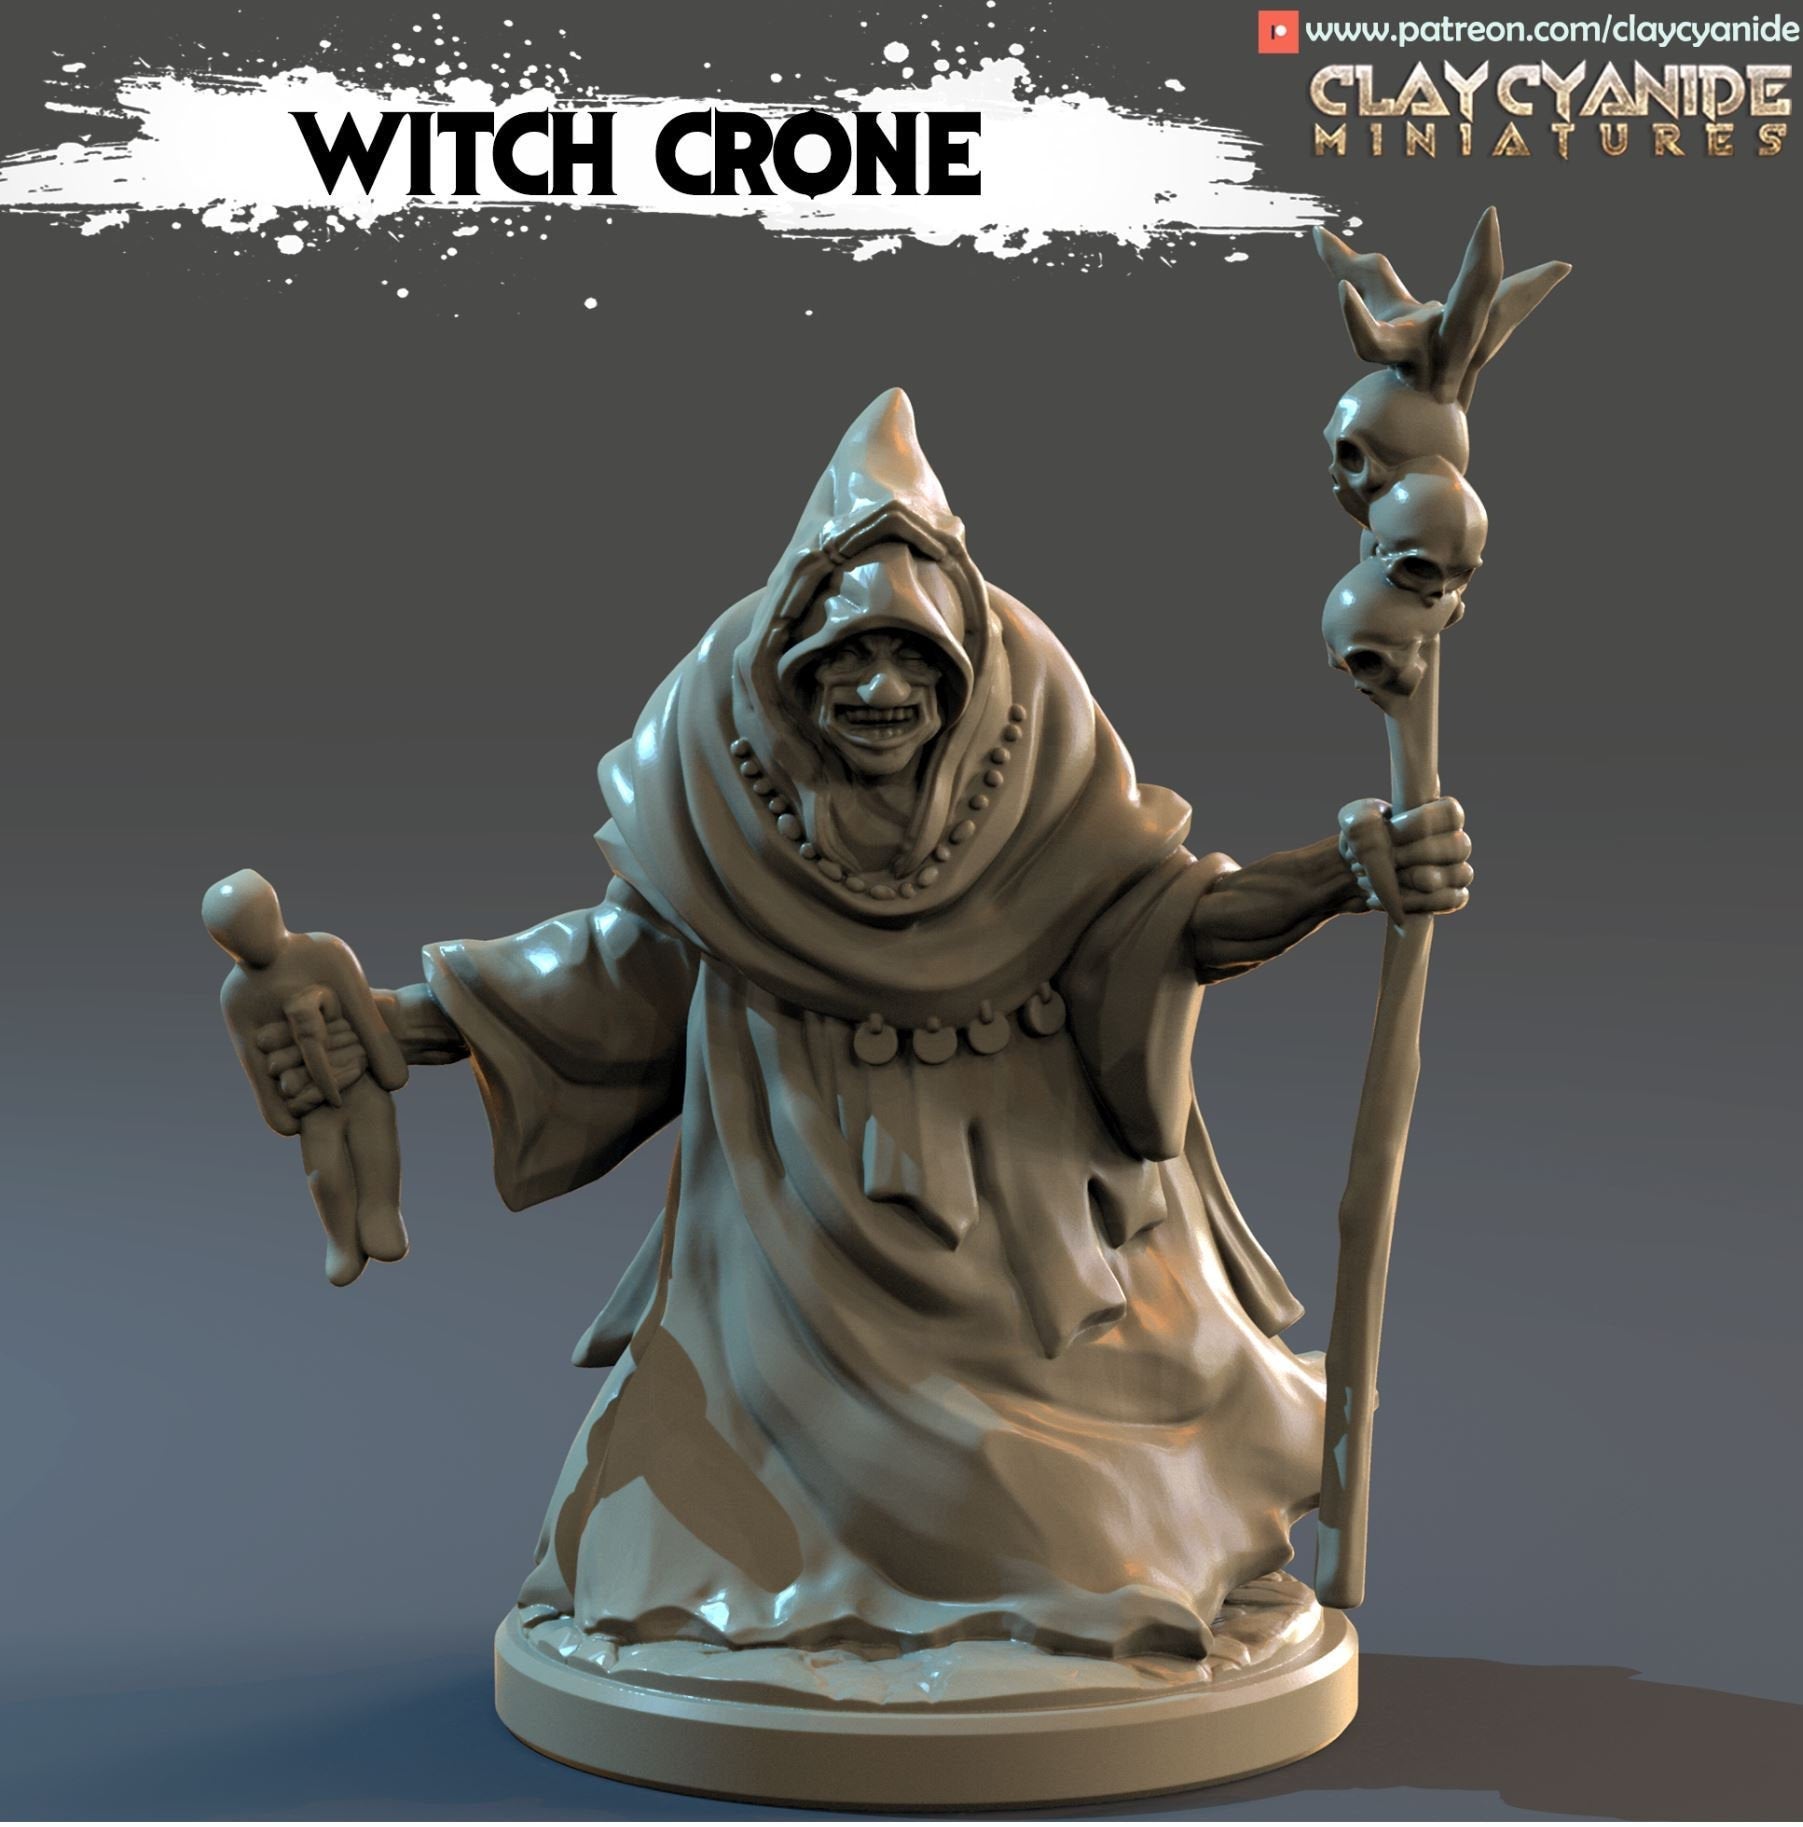 Witch Crone from Clay Cyanide Miniatures. This piece is very much a Premium Print! 2 Piece Set